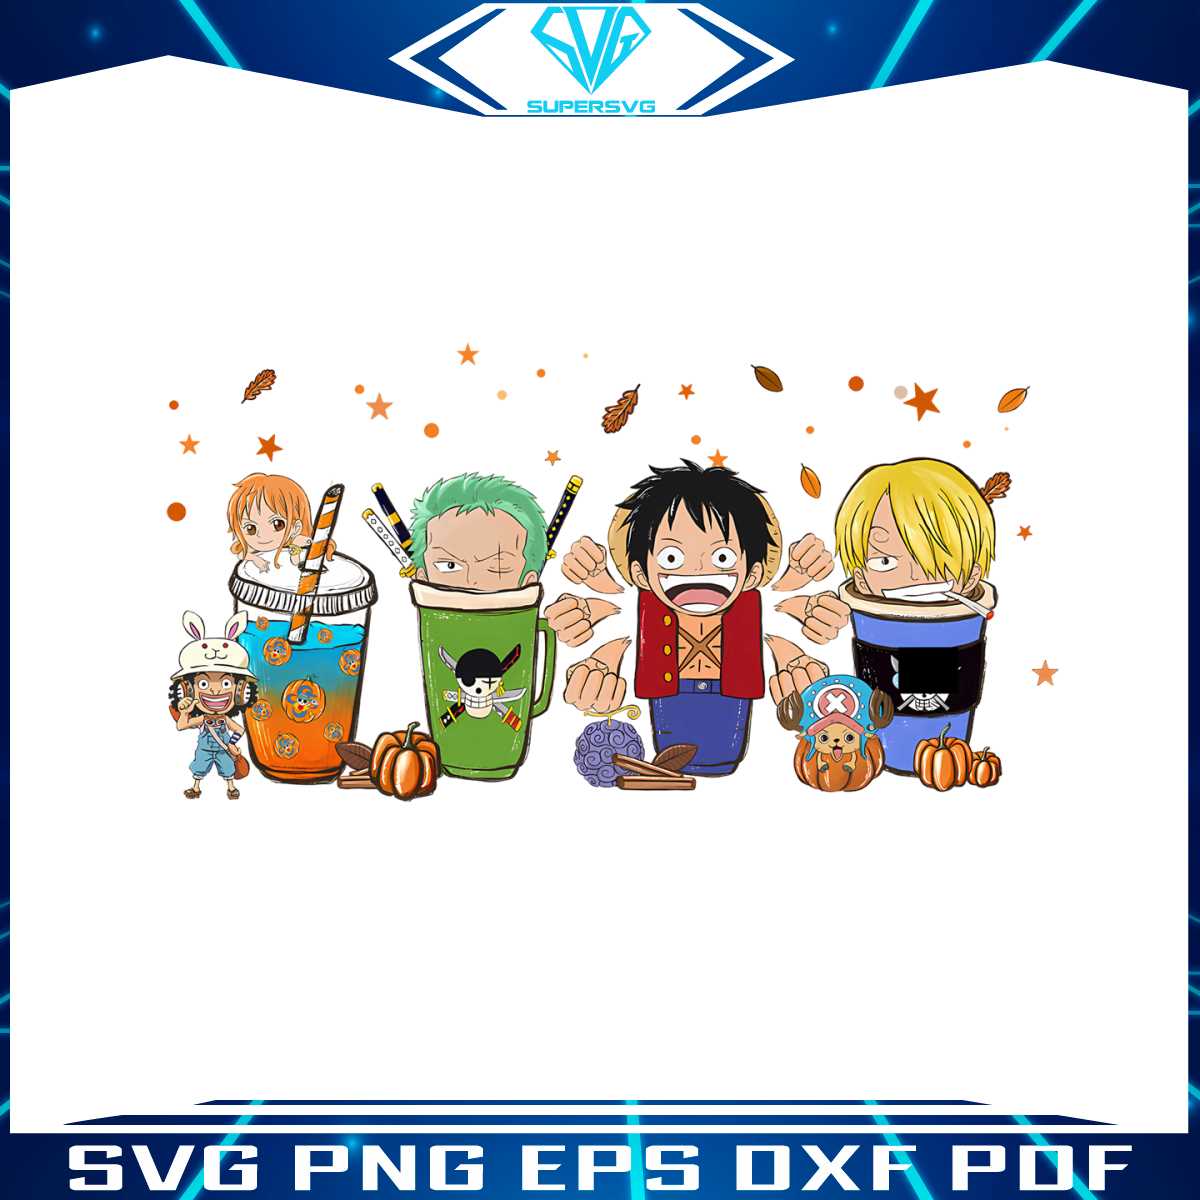 pirate-king-and-friends-one-piece-png-sublimation-download